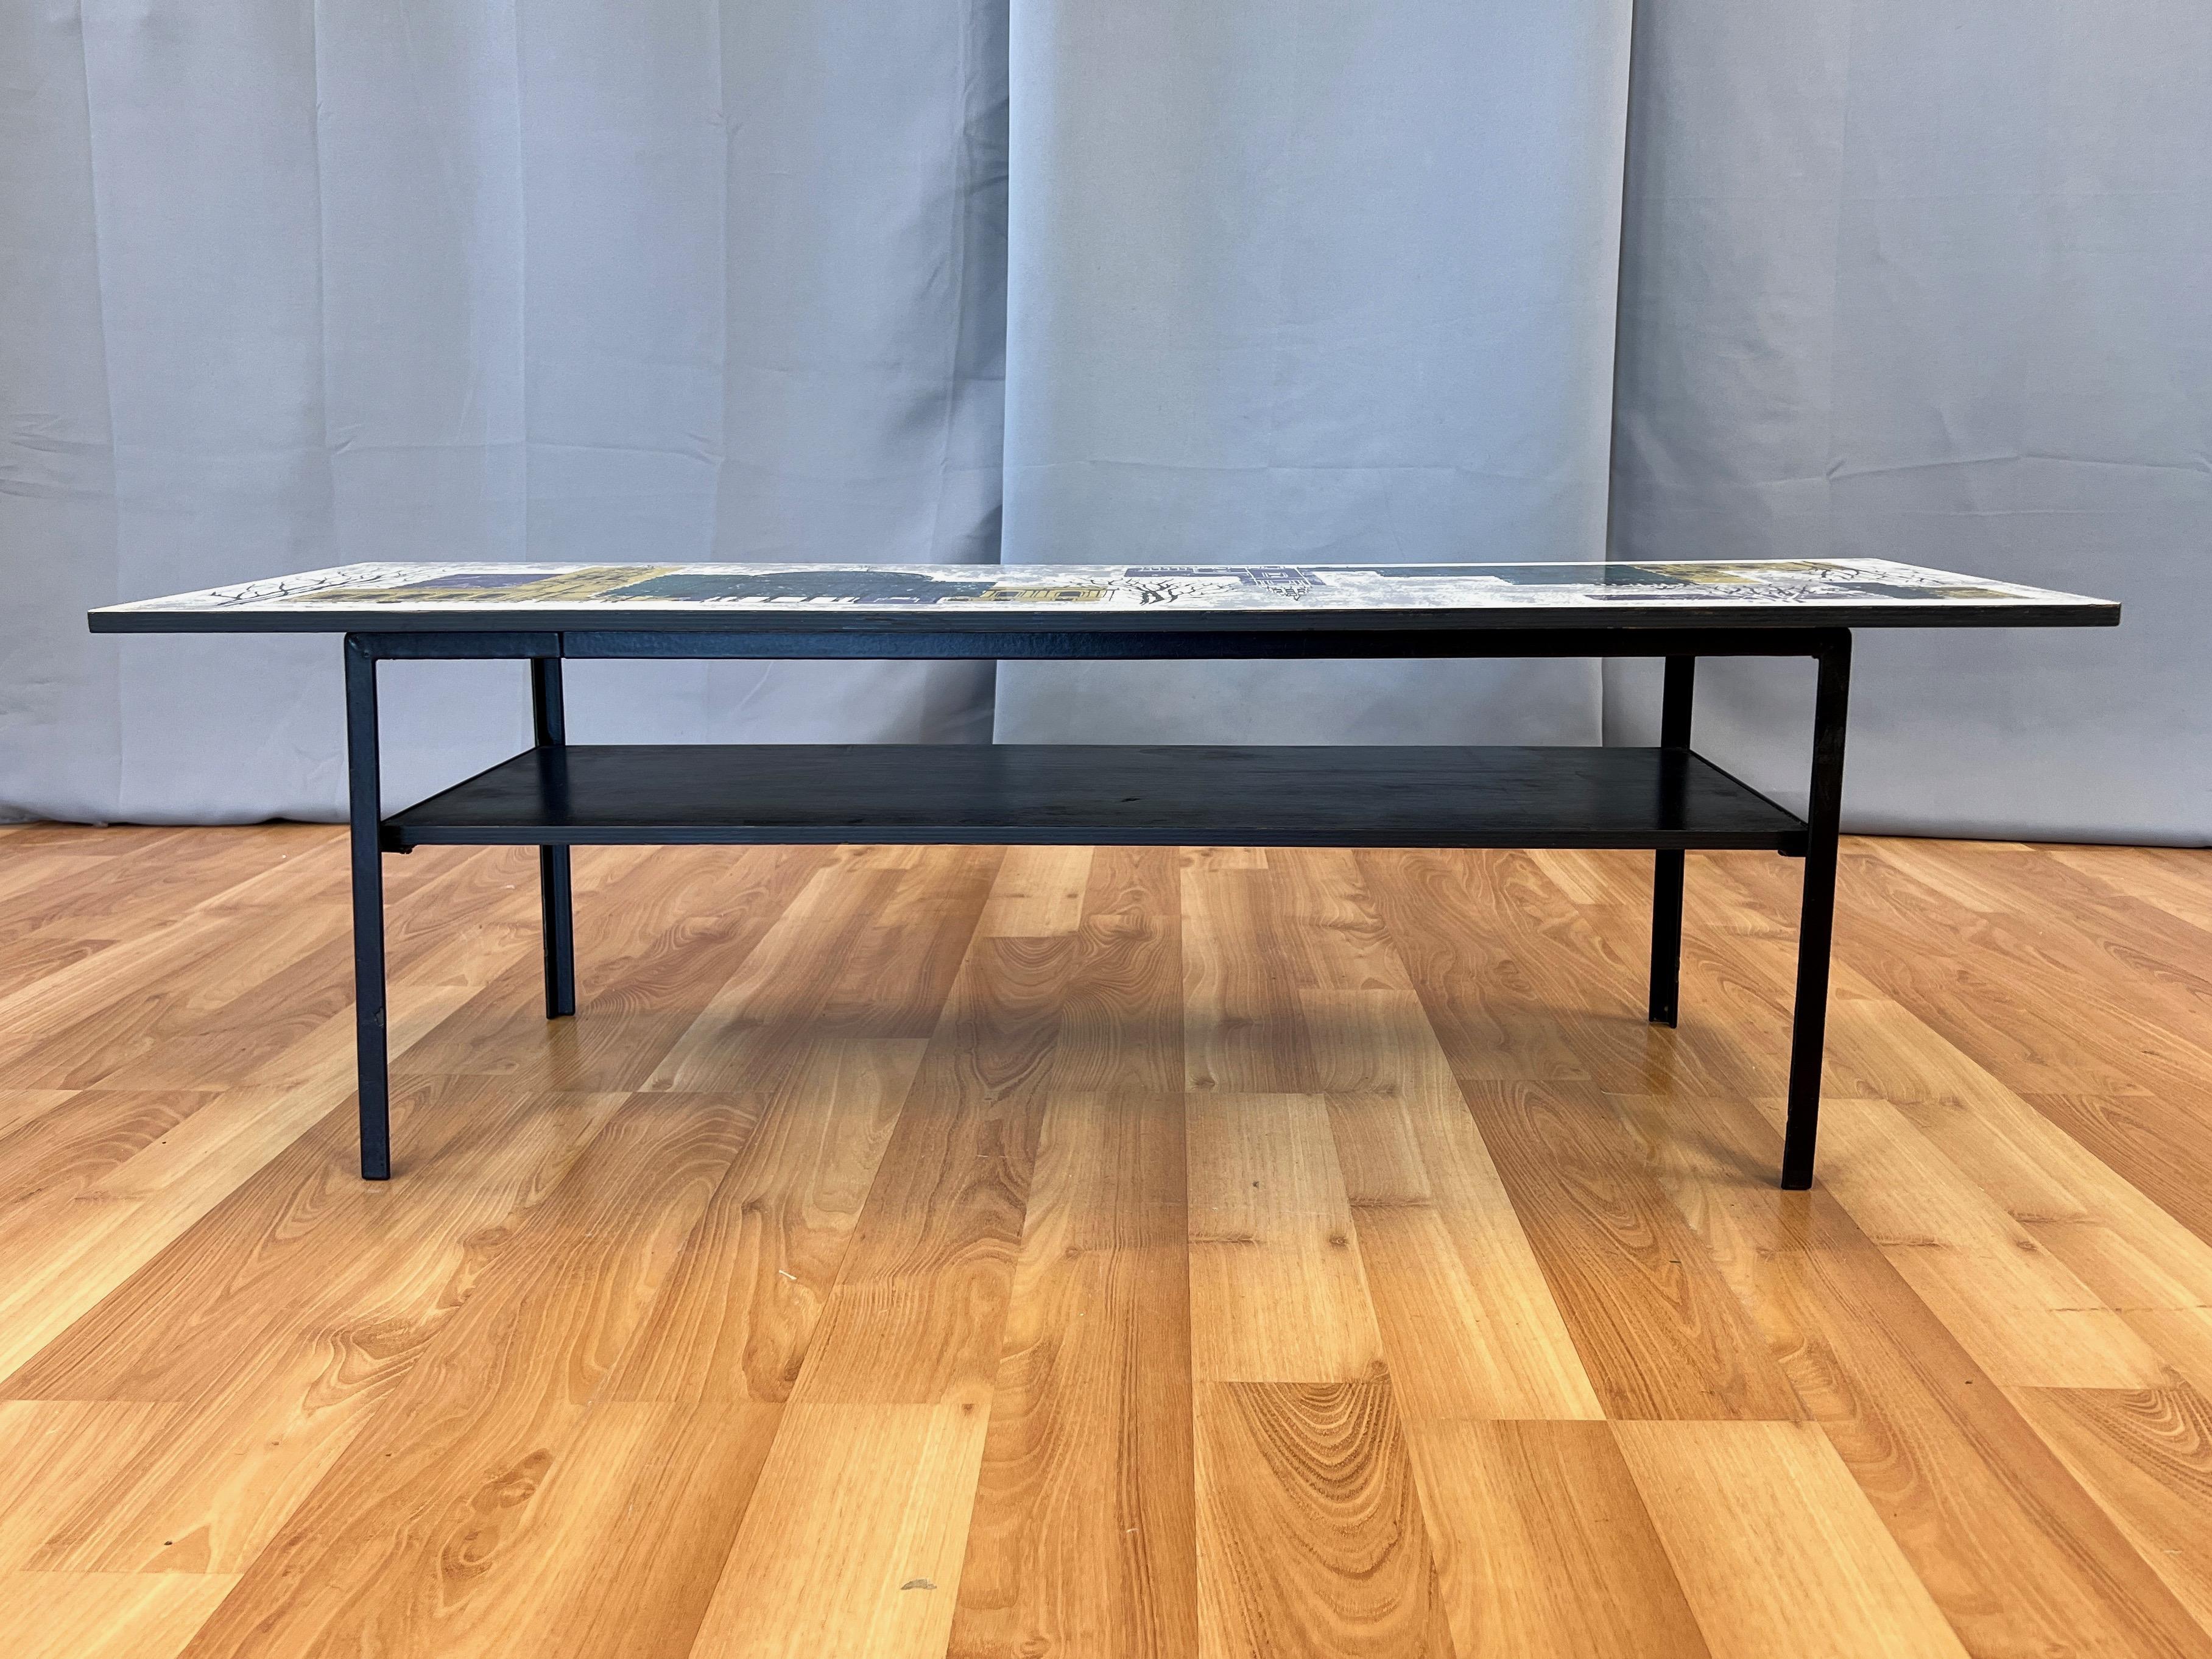 British John Piper London Skyline Coffee Table by Myer for Conran and Heal’s, c. 1960 For Sale